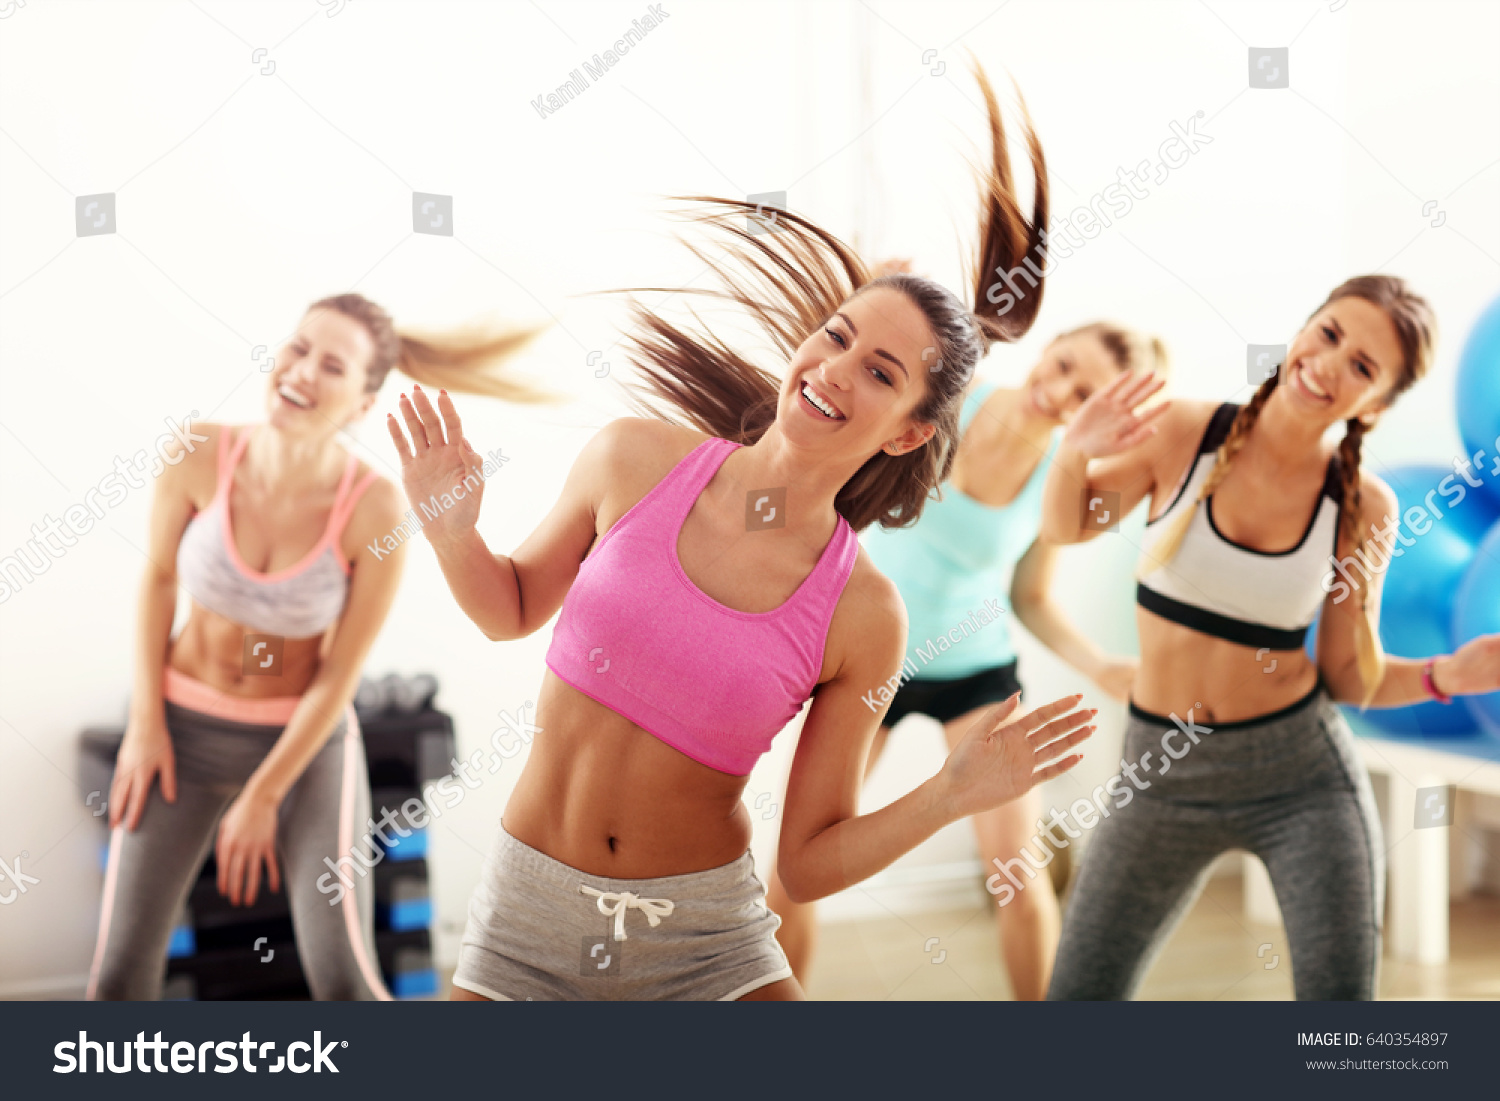 Group of happy people with coach dancing in gym #640354897